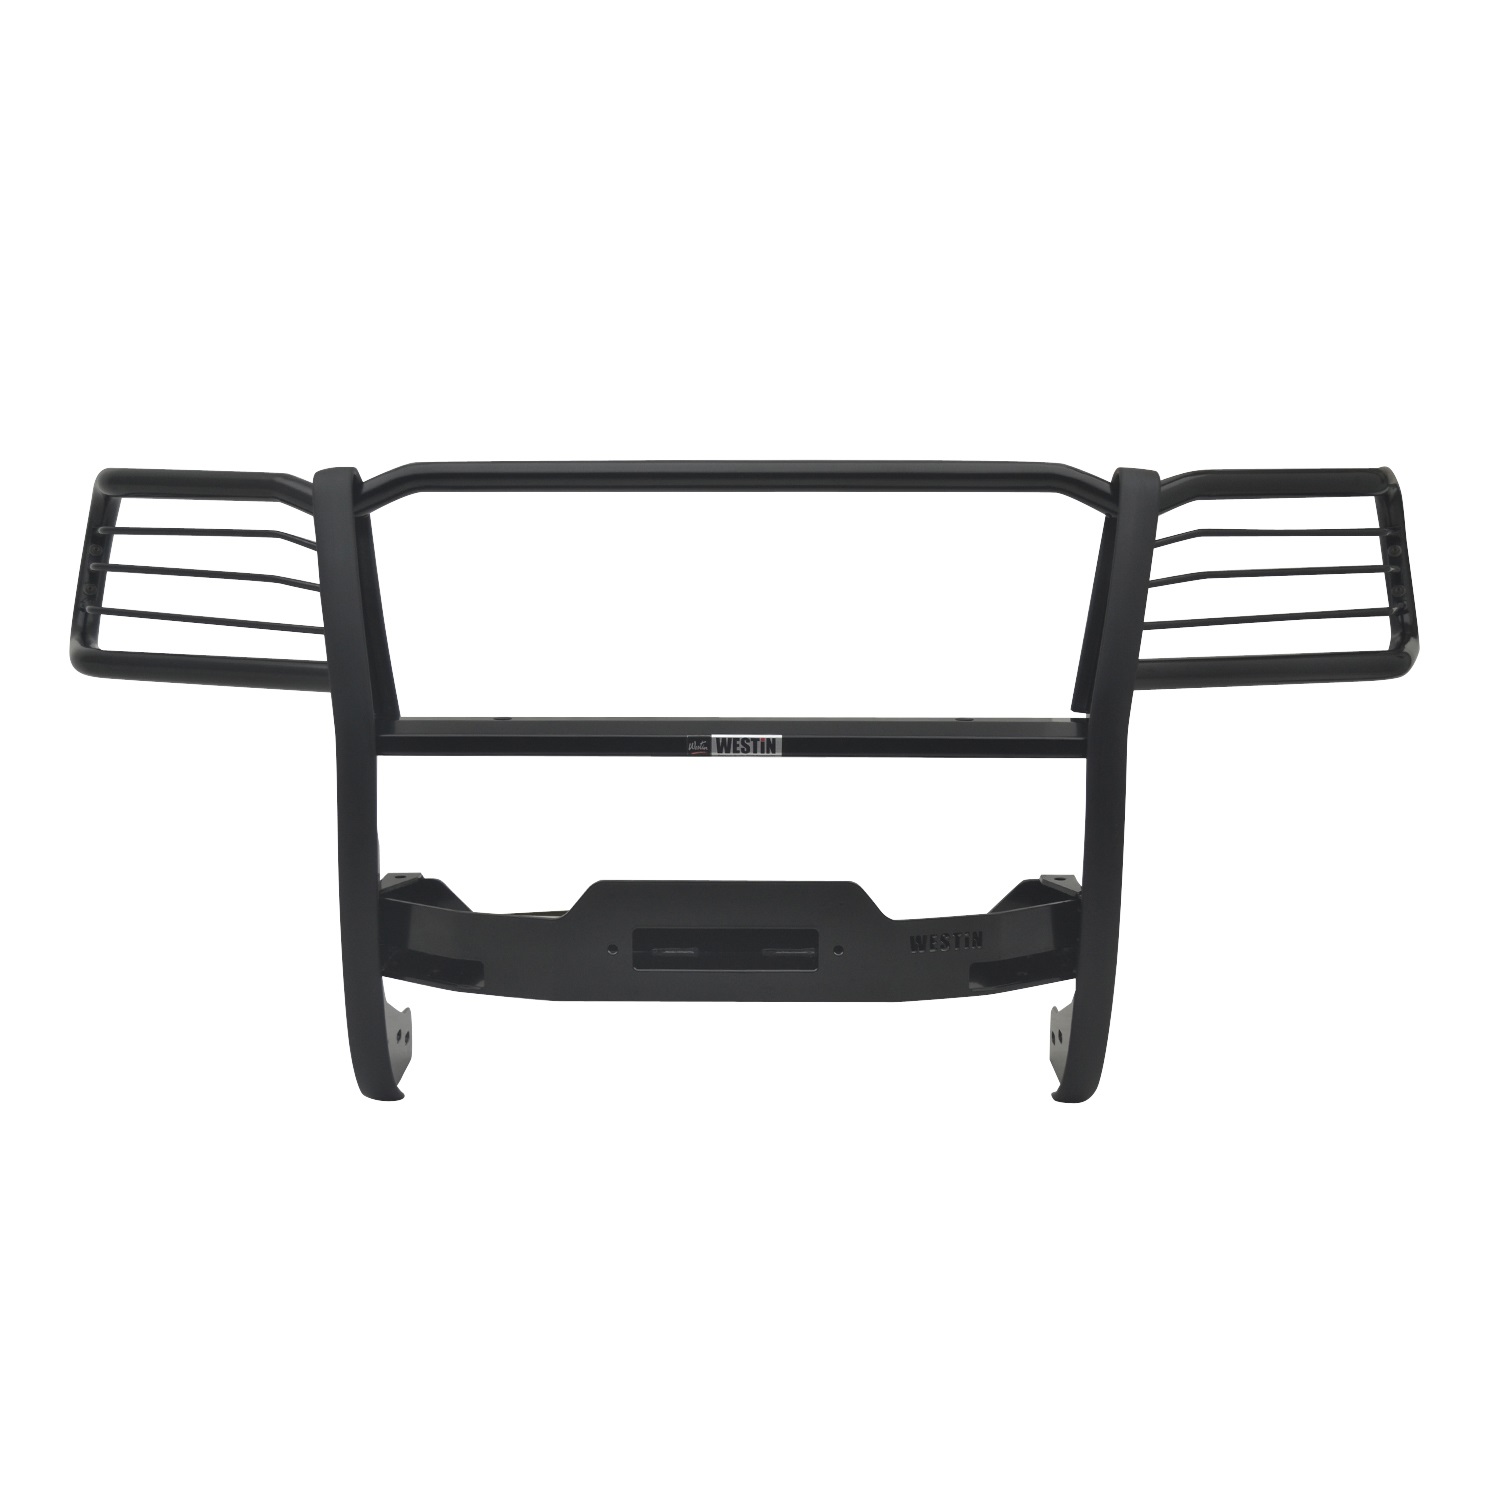 Westin Westin 40-91605 Sportsman; Winch Mount Grille Guard Fits 05-15 Tacoma